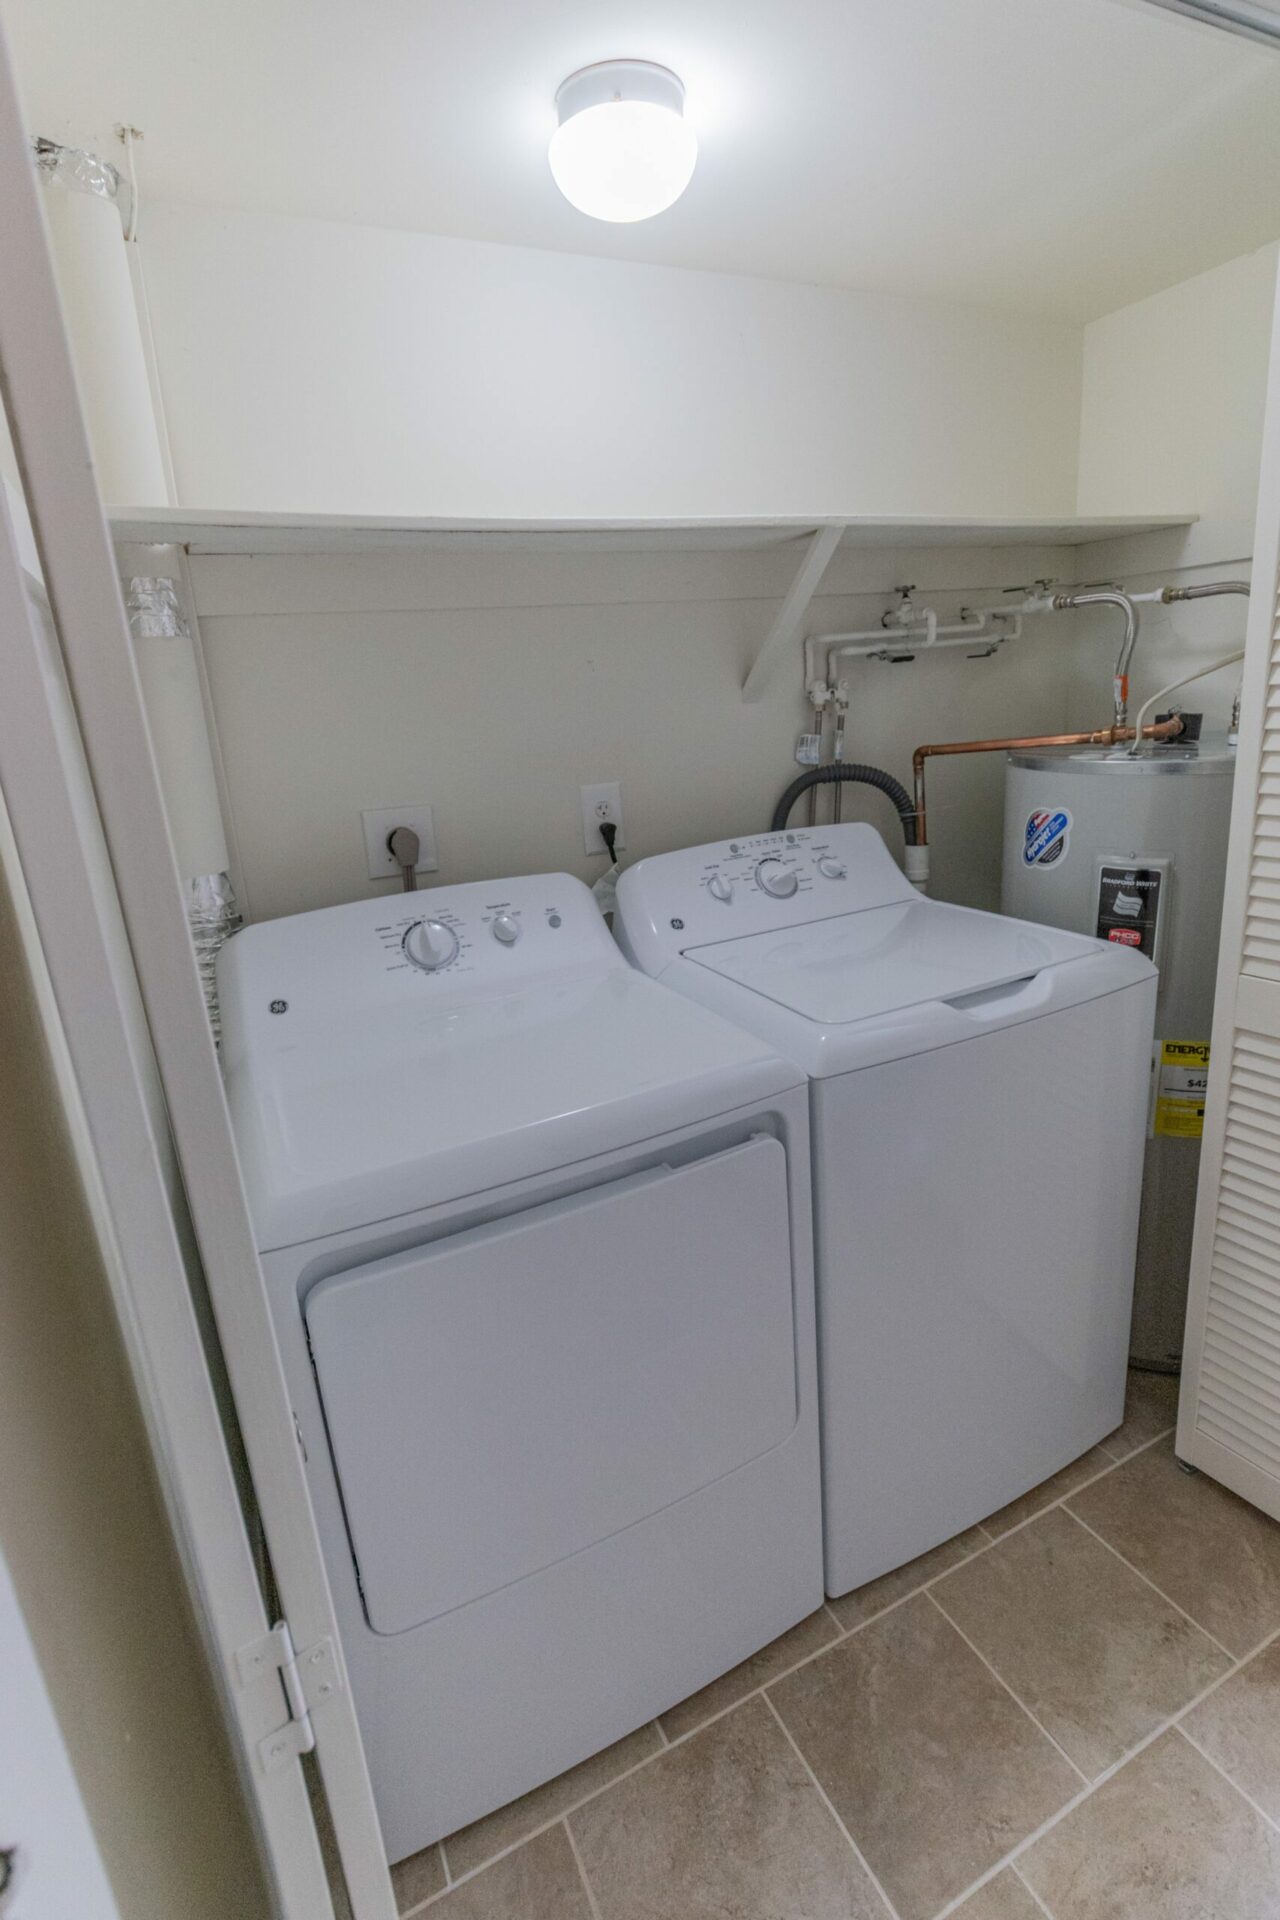 Whiteland West washer and dryer in apartment